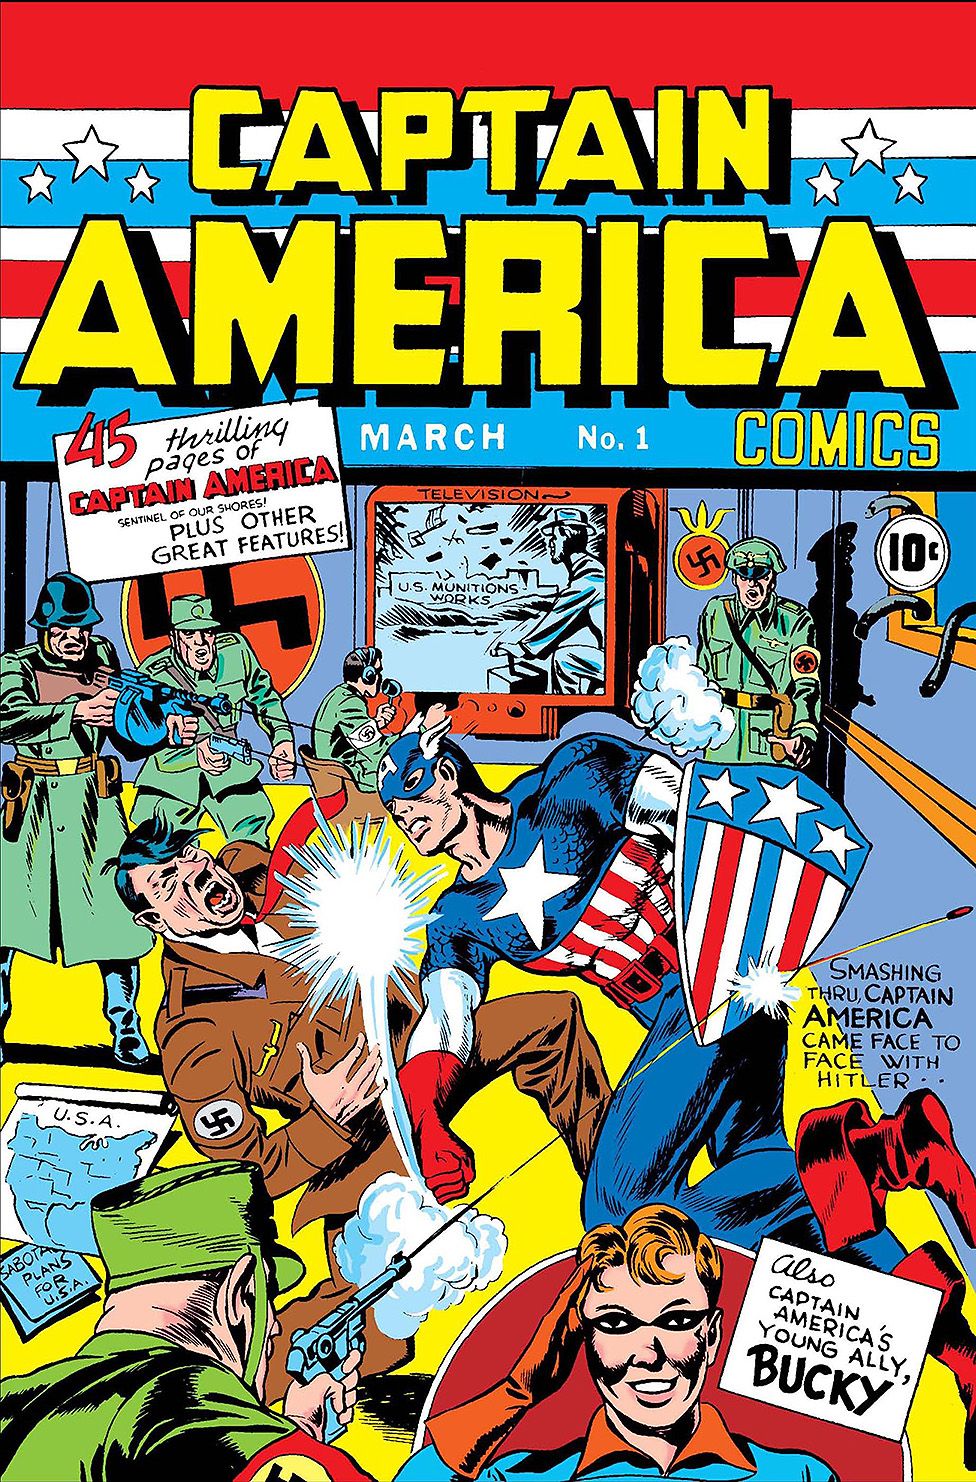 Captain America punches Hitler